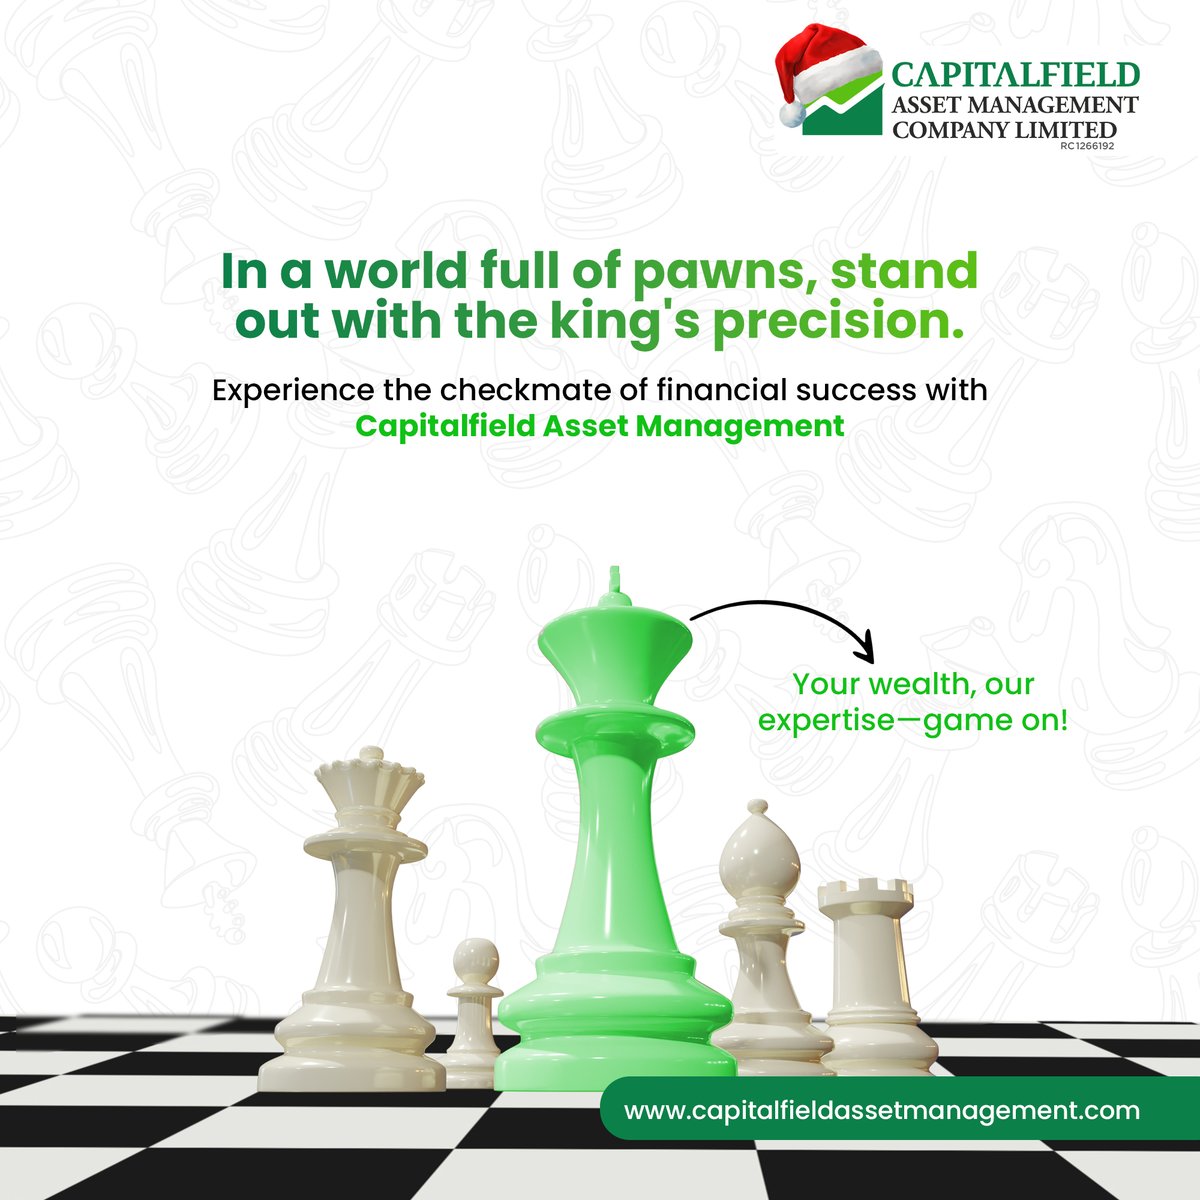 Mastering Wealth Advisory & Financial Planning

In the intricate game of finance, strategic moves make all the difference. At Capitalfield Asset Management, we approach Wealth Advisory & Financial Planning like a chess grandmaster strategizing for victory.